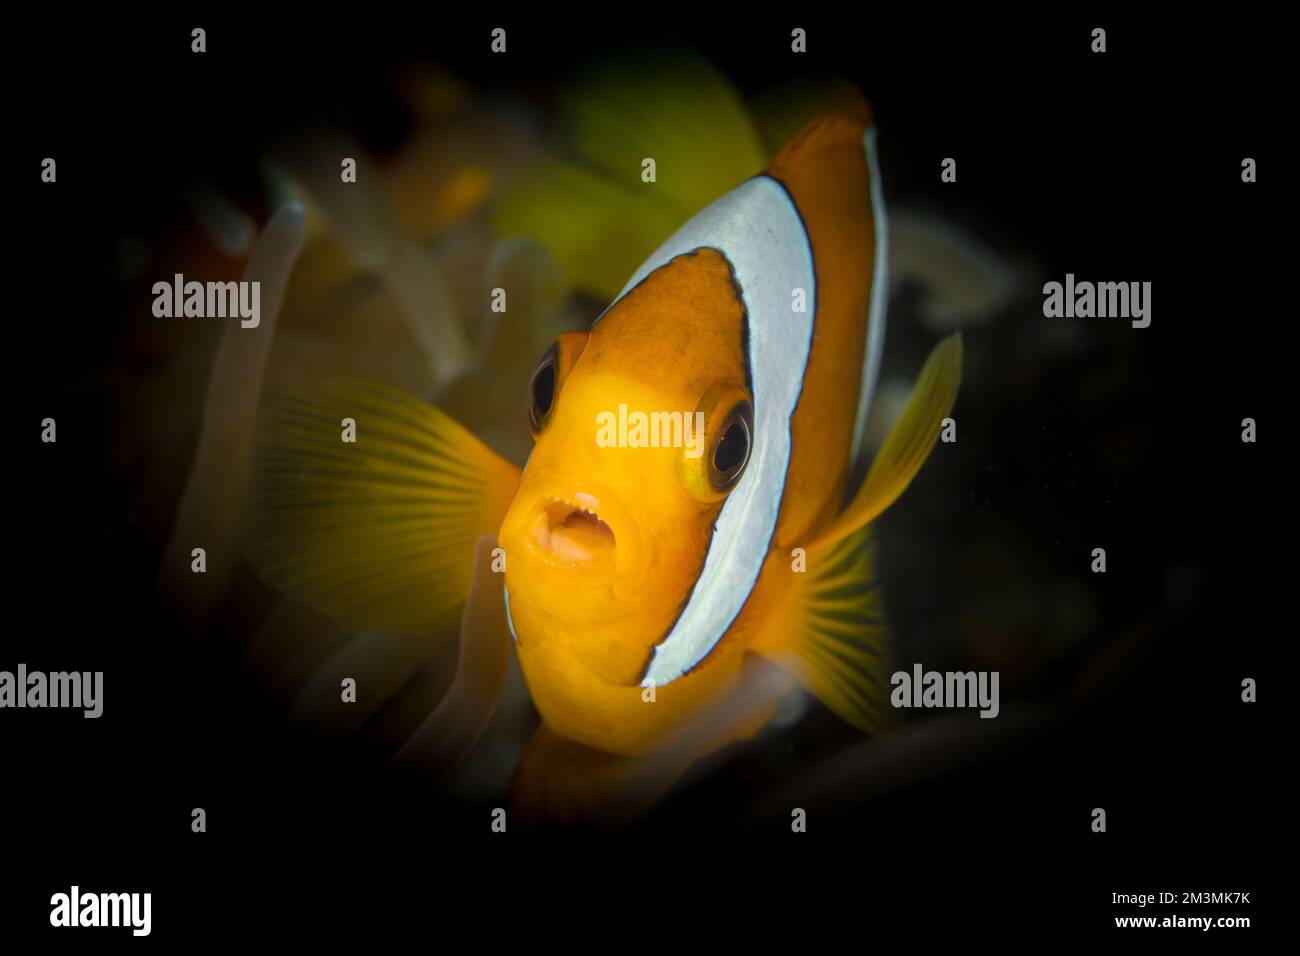 Clarks anemonefish swimming above healthy coral reef Stock Photo - Alamy